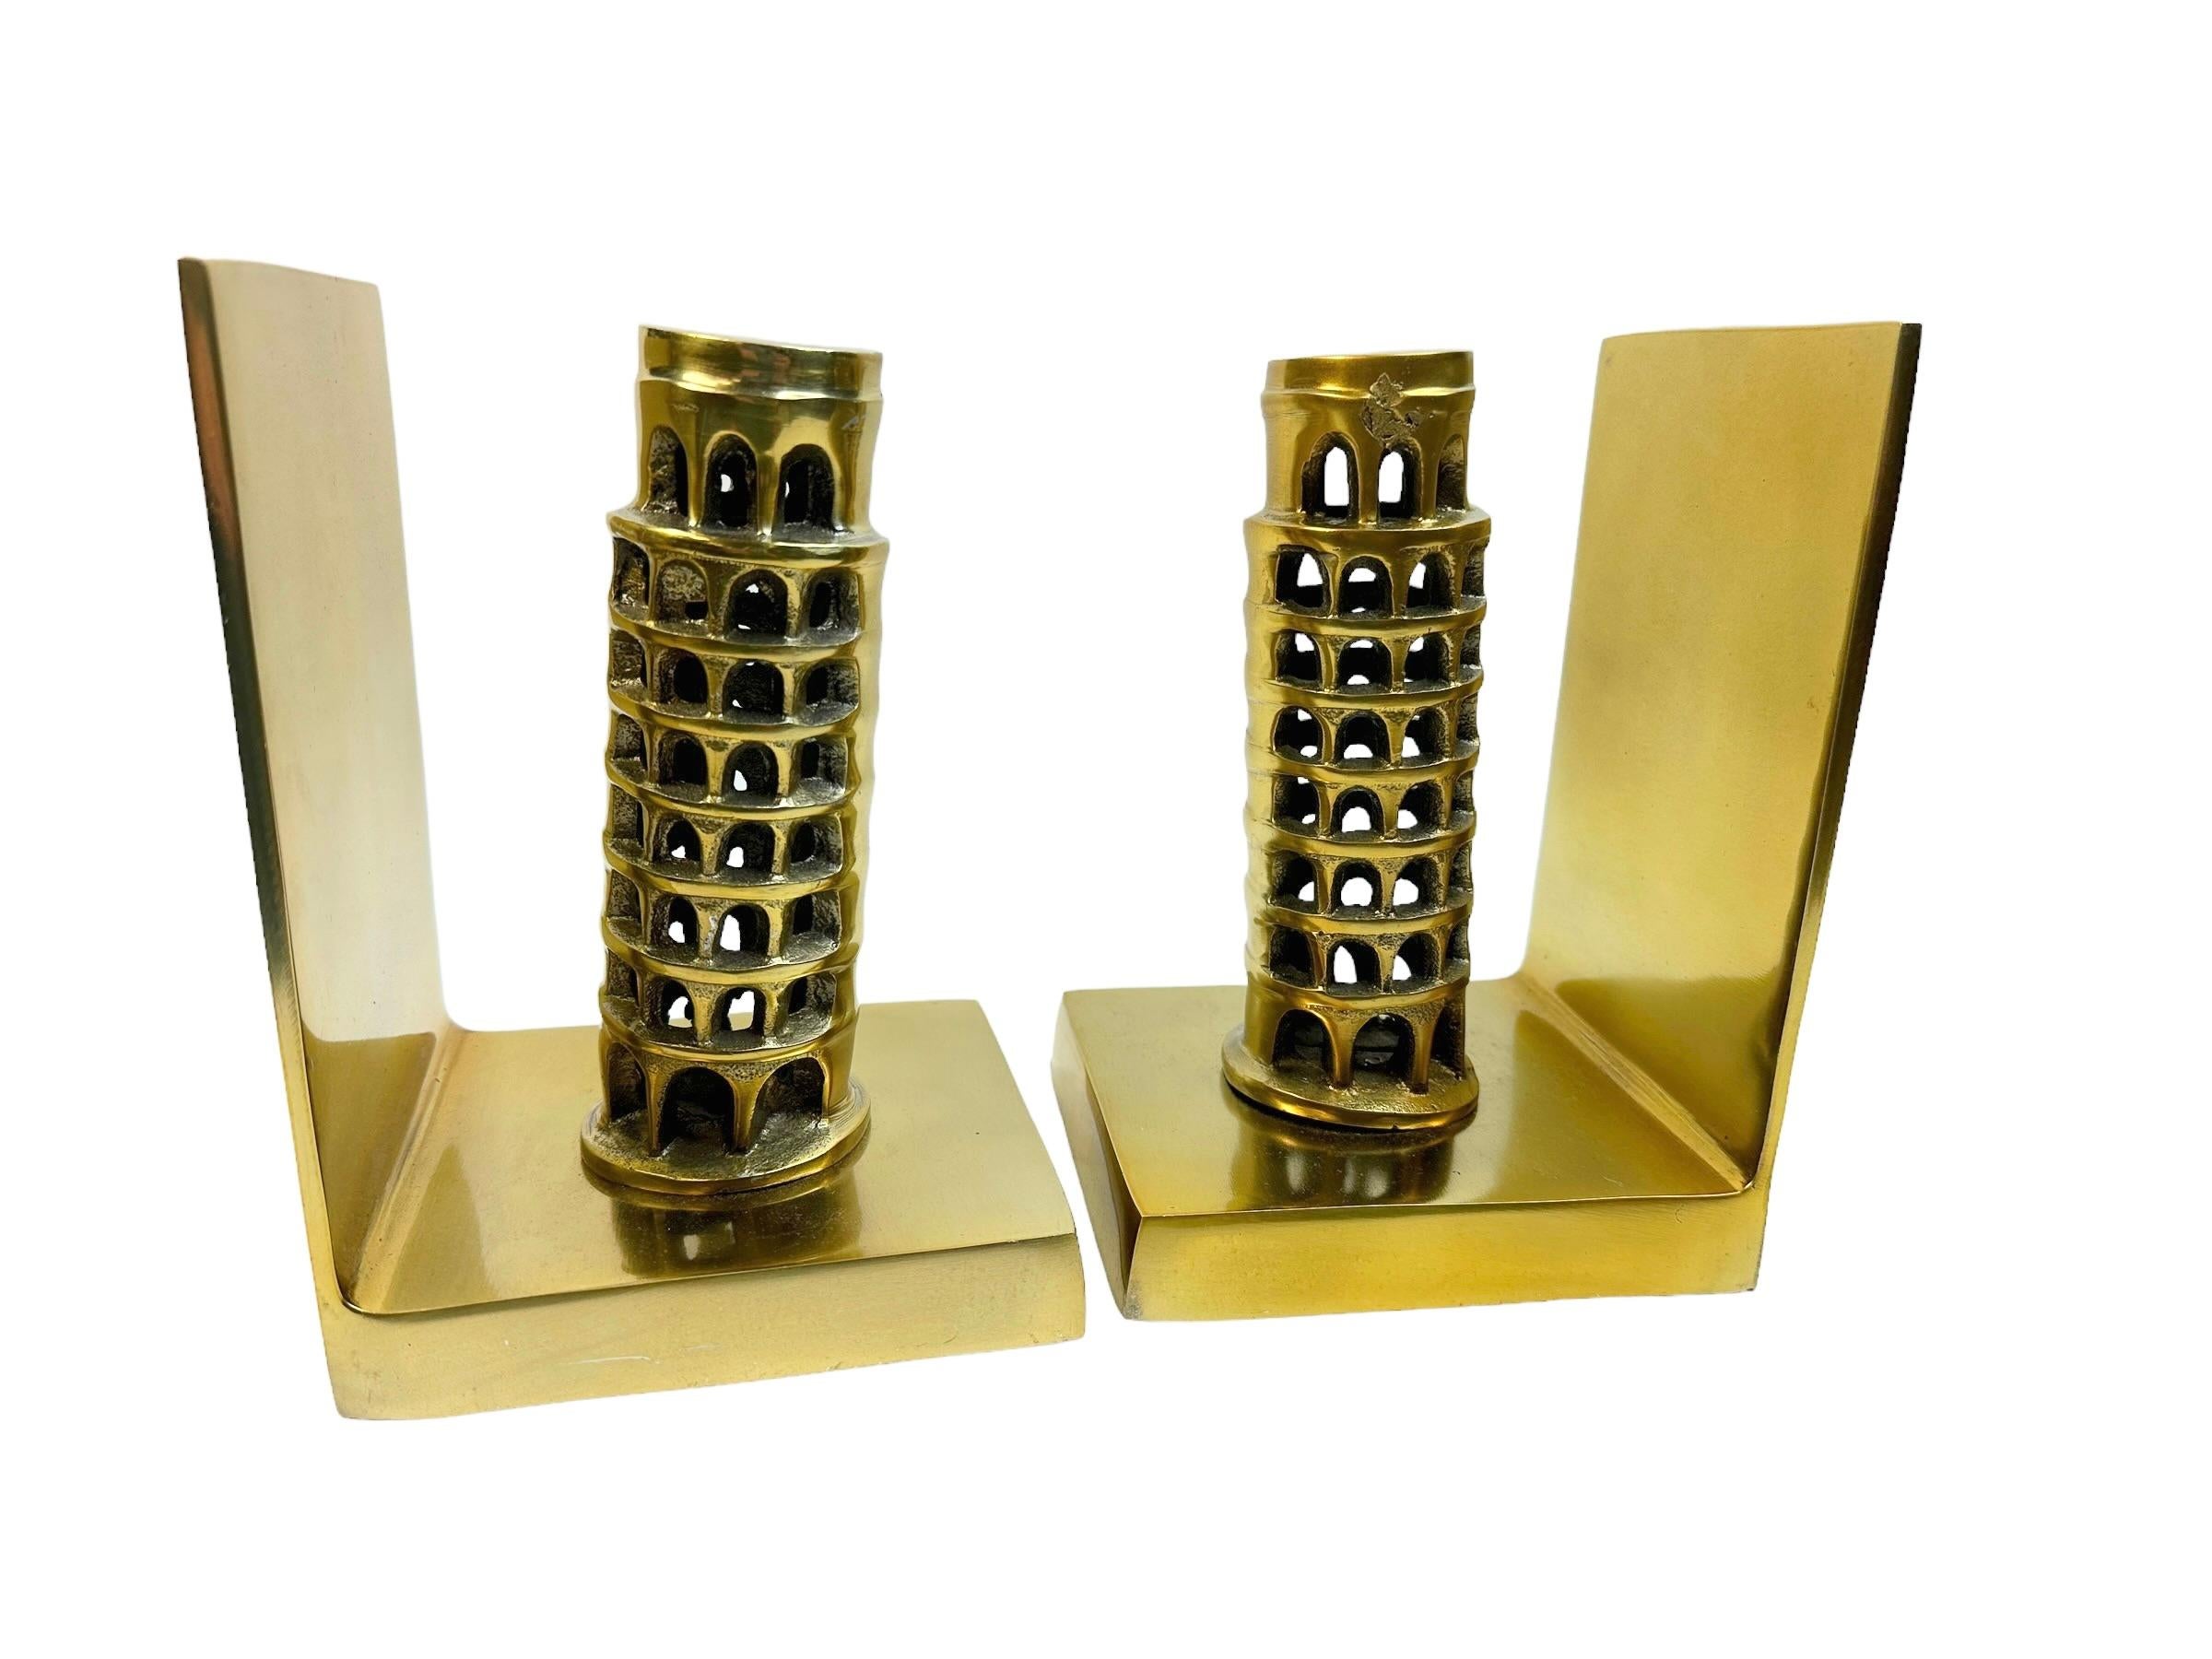 Late 20th Century Unique Leaning Tower of Pisa Pair of Bookends, Modernist Italy 1980s For Sale